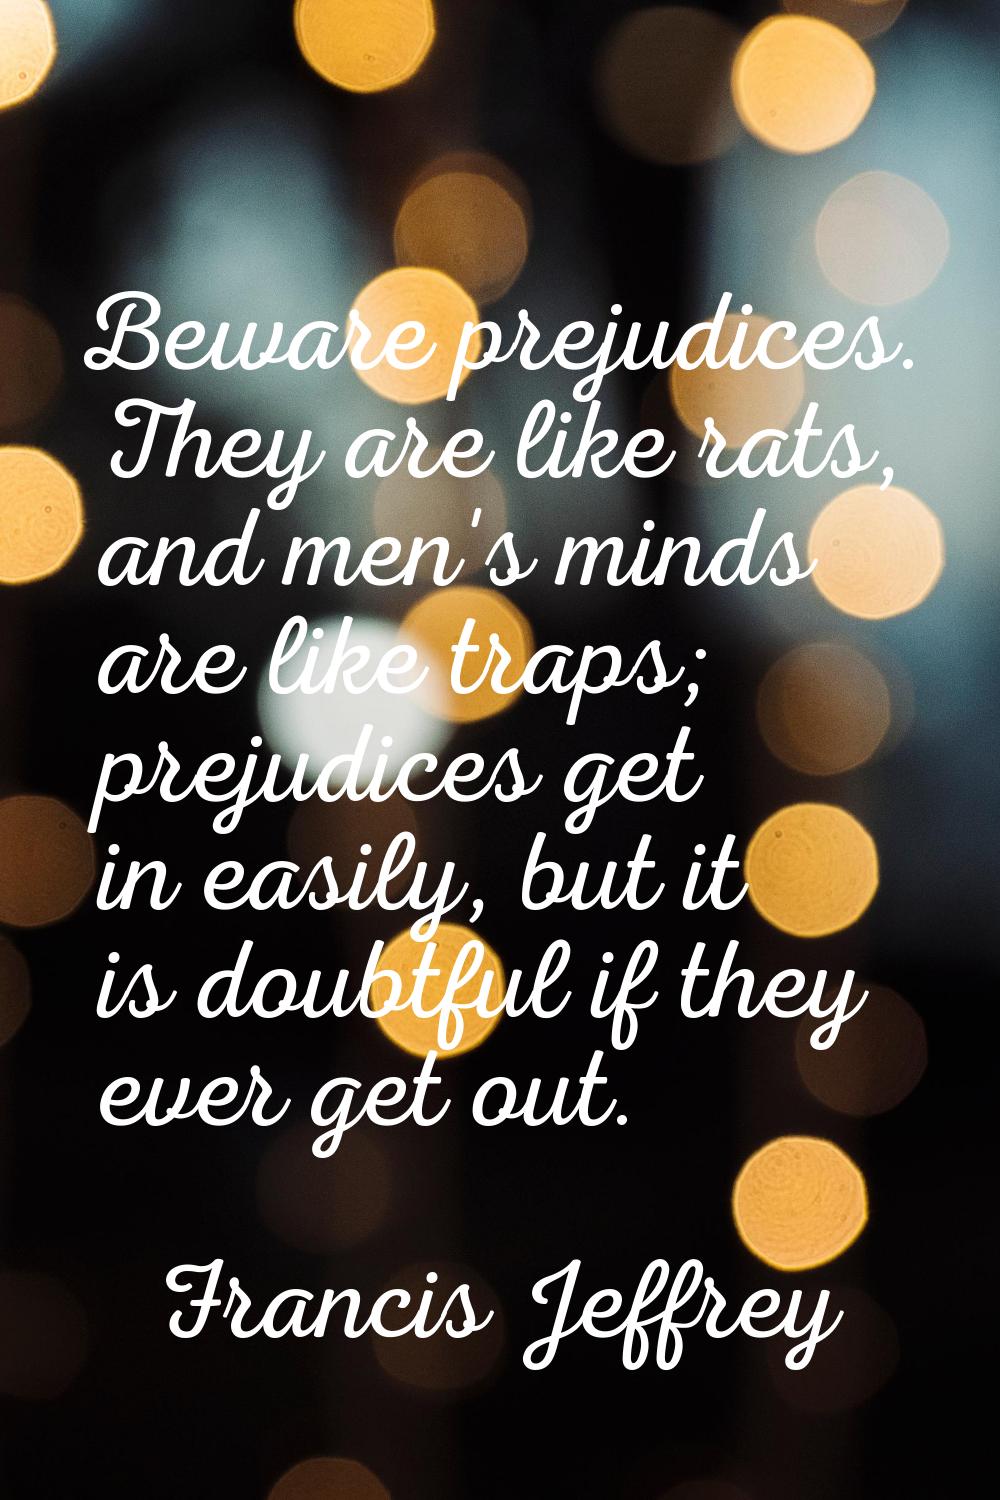 Beware prejudices. They are like rats, and men's minds are like traps; prejudices get in easily, bu